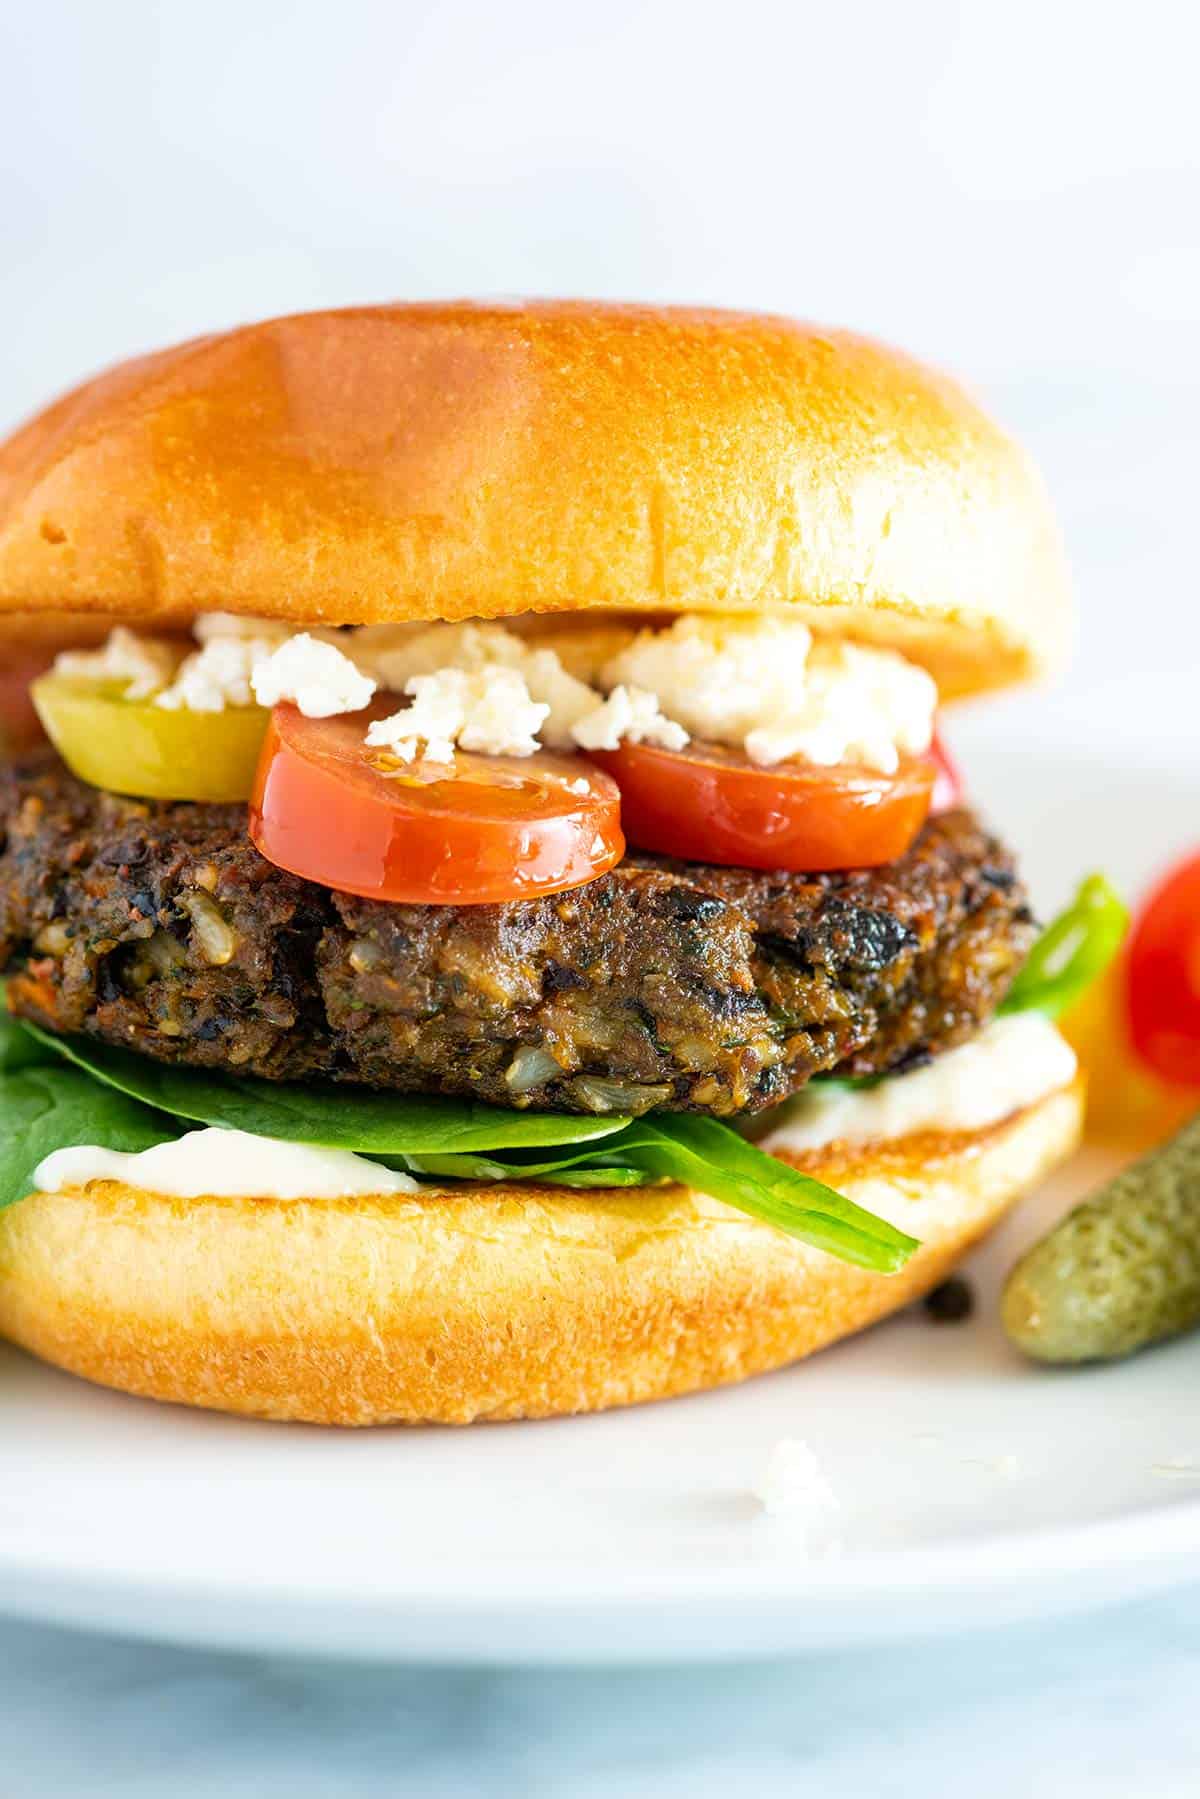 6 Store-Bought Burgers That Don't Use 100% Pure Beef